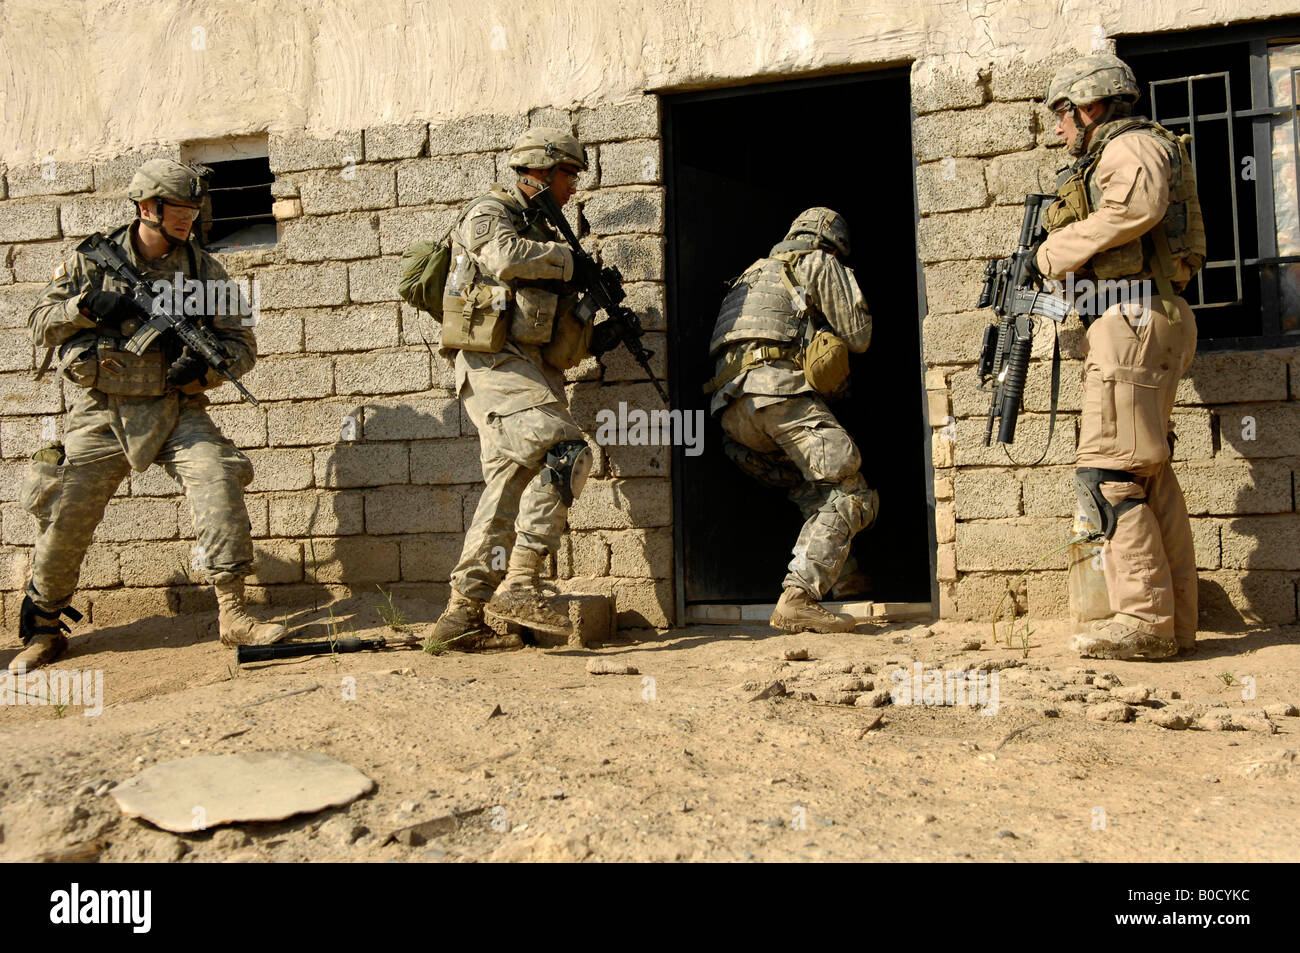 U S Army soldiers breach a house to search for insurgent activities during an operation in Zaghiniyat Iraq on March 29 2007 Stock Photo